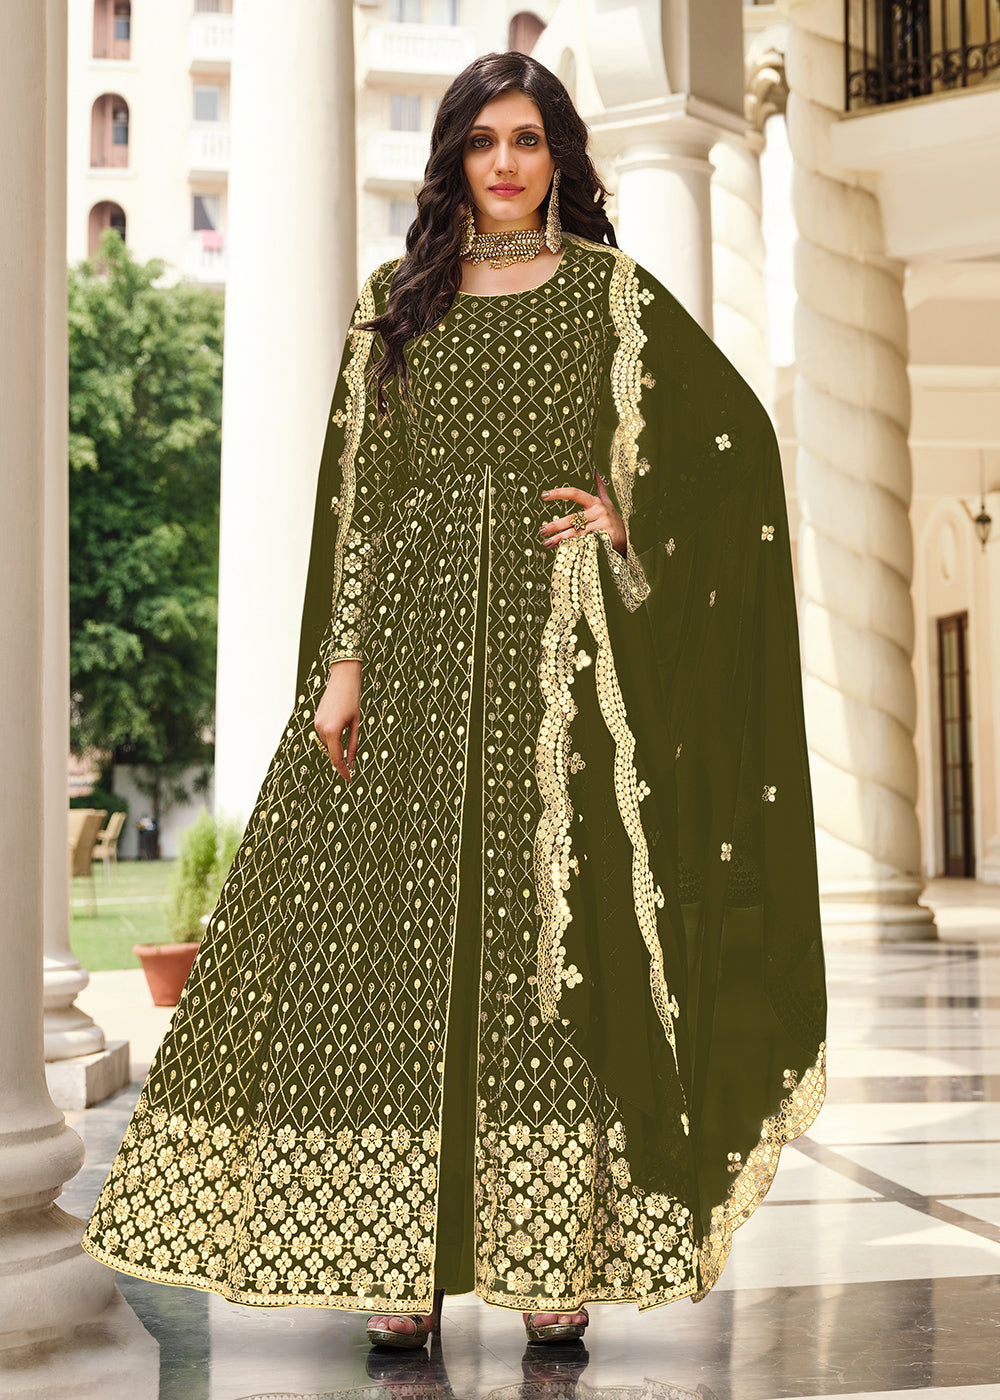 Buy Now Supreme Green Sequins Wedding Pant Style Anarkali Suit Online in USA, UK, Australia, New Zealand, Canada & Worldwide at Empress Clothing.